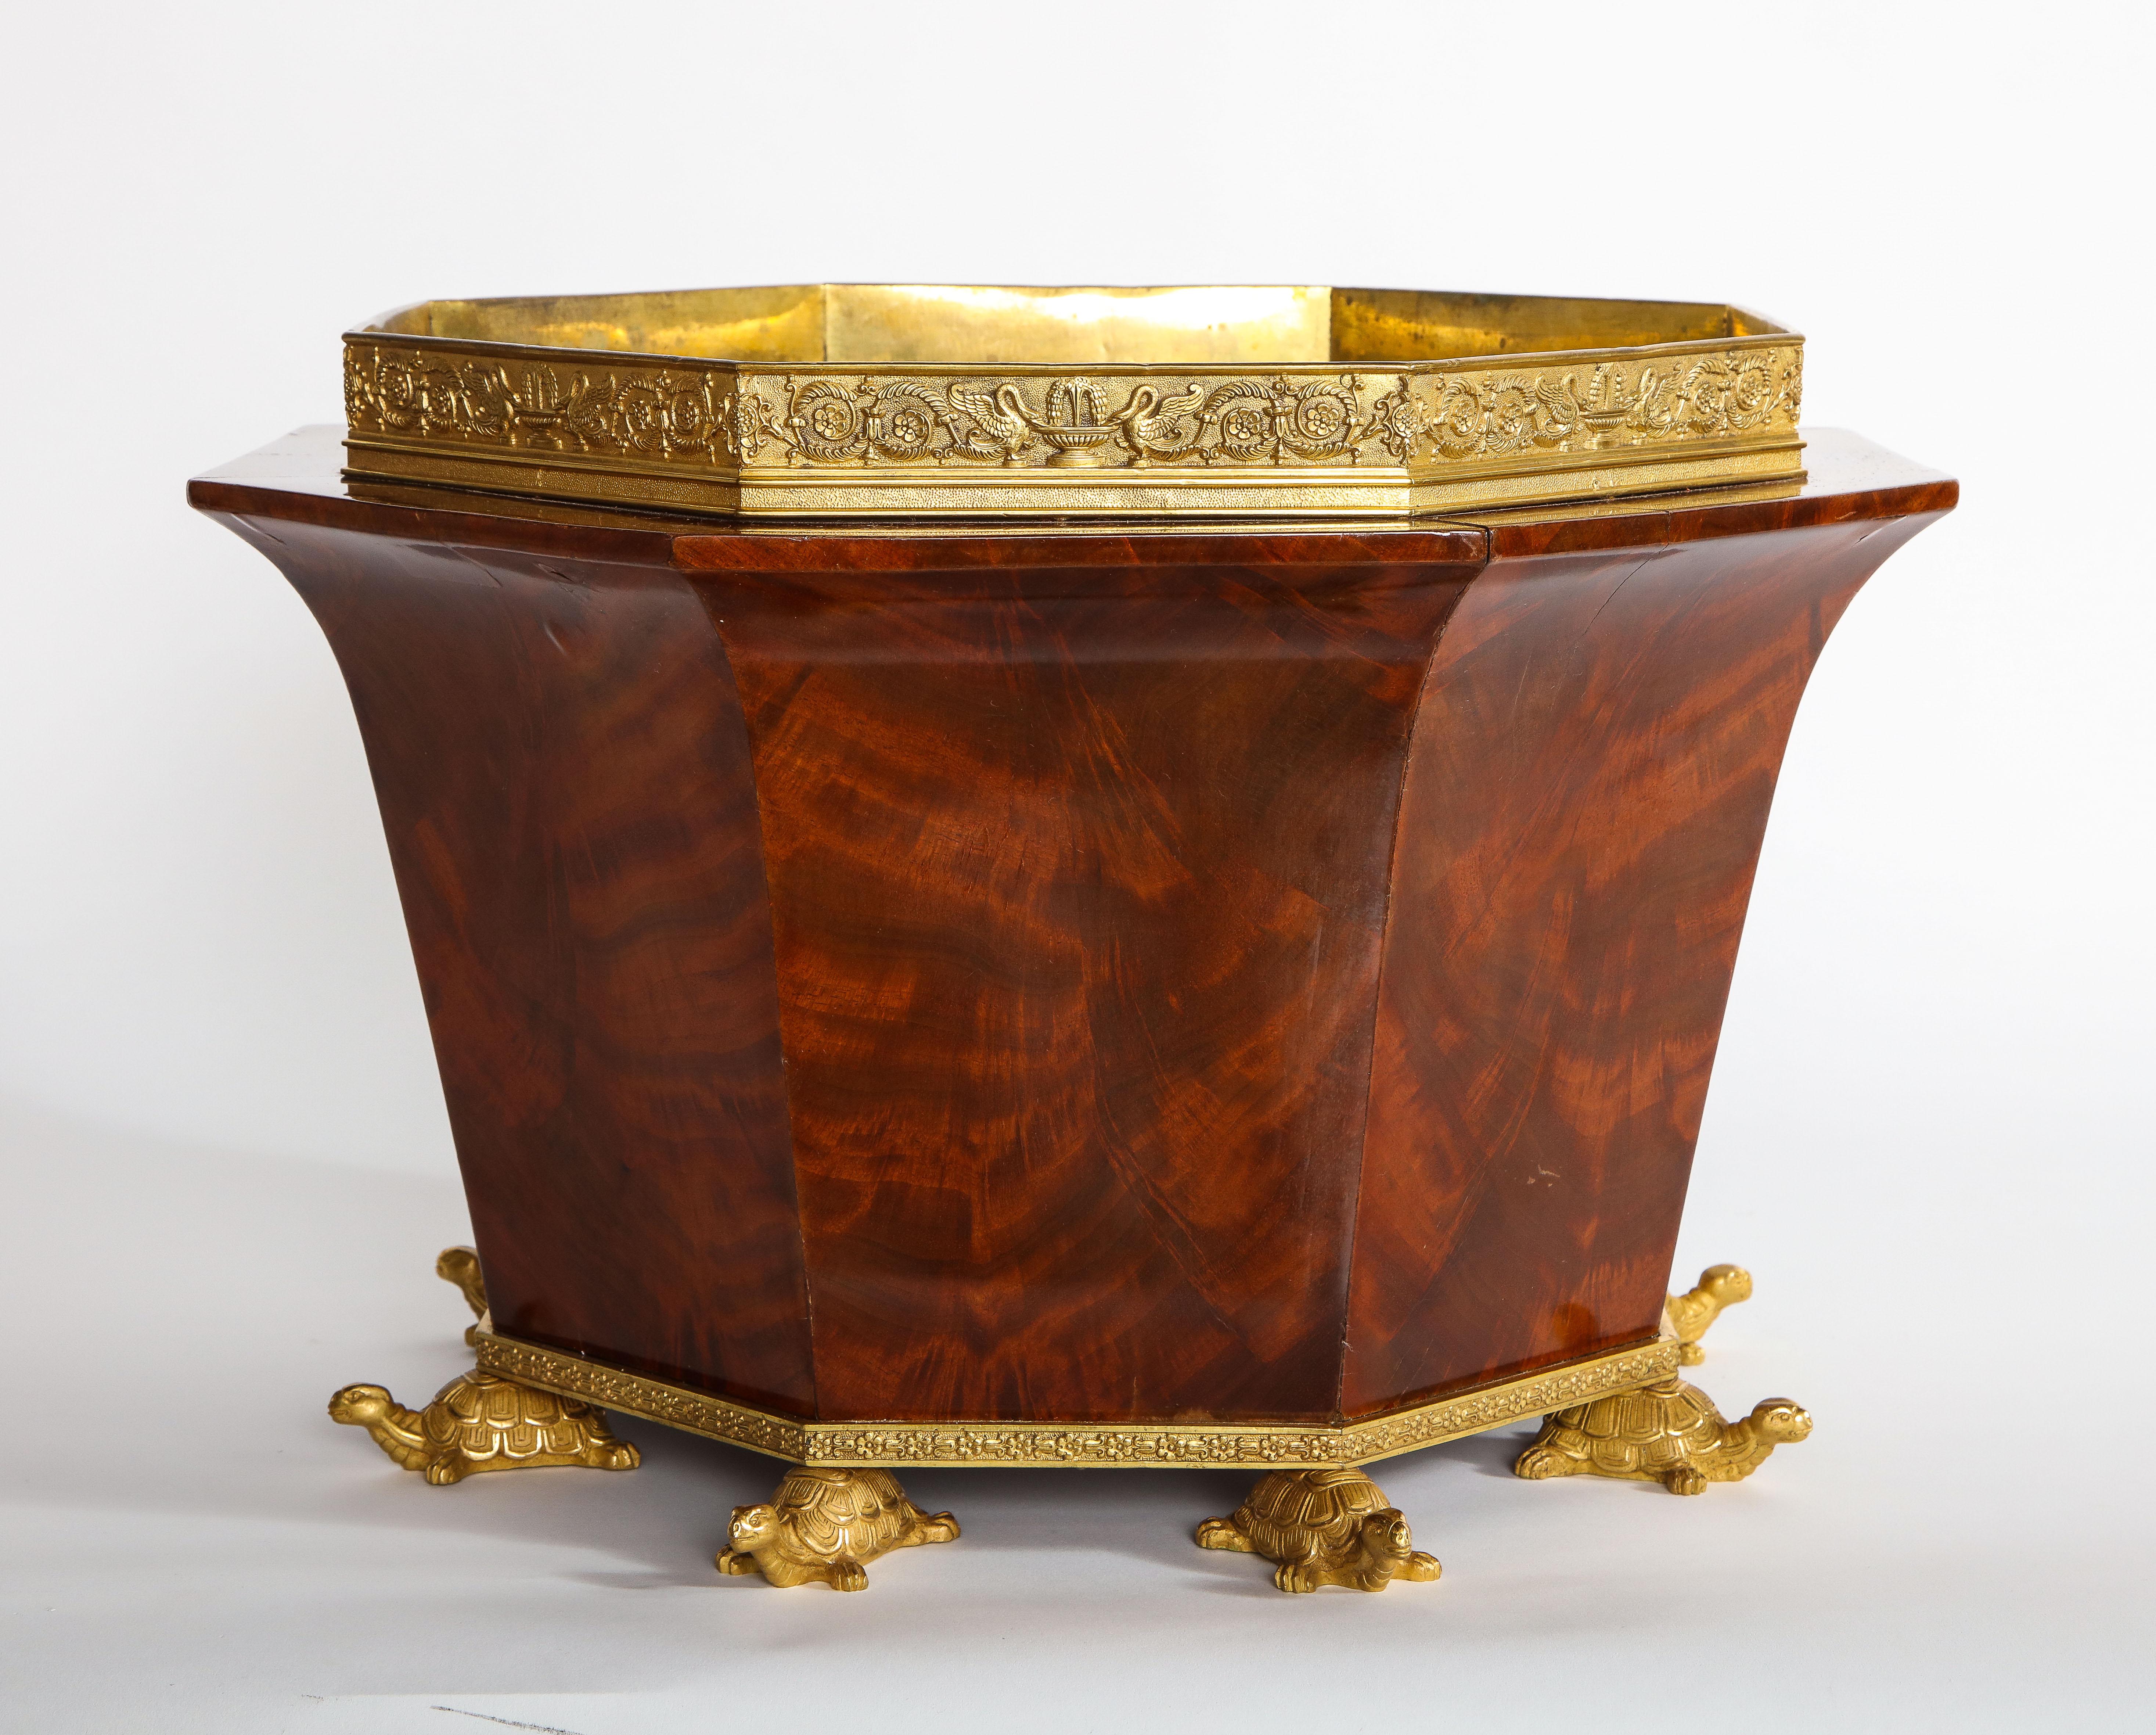 A Fantastic and Very Important Empire Period German Ormolu-Mounted Mahogany Jardiniere Mounted on Dore Bronze Turtle Feet, In The Manner Of Johannes Klinkerfuss And Casimir Münch. This is truly a masterpiece jardiniere and was crafted by two of the